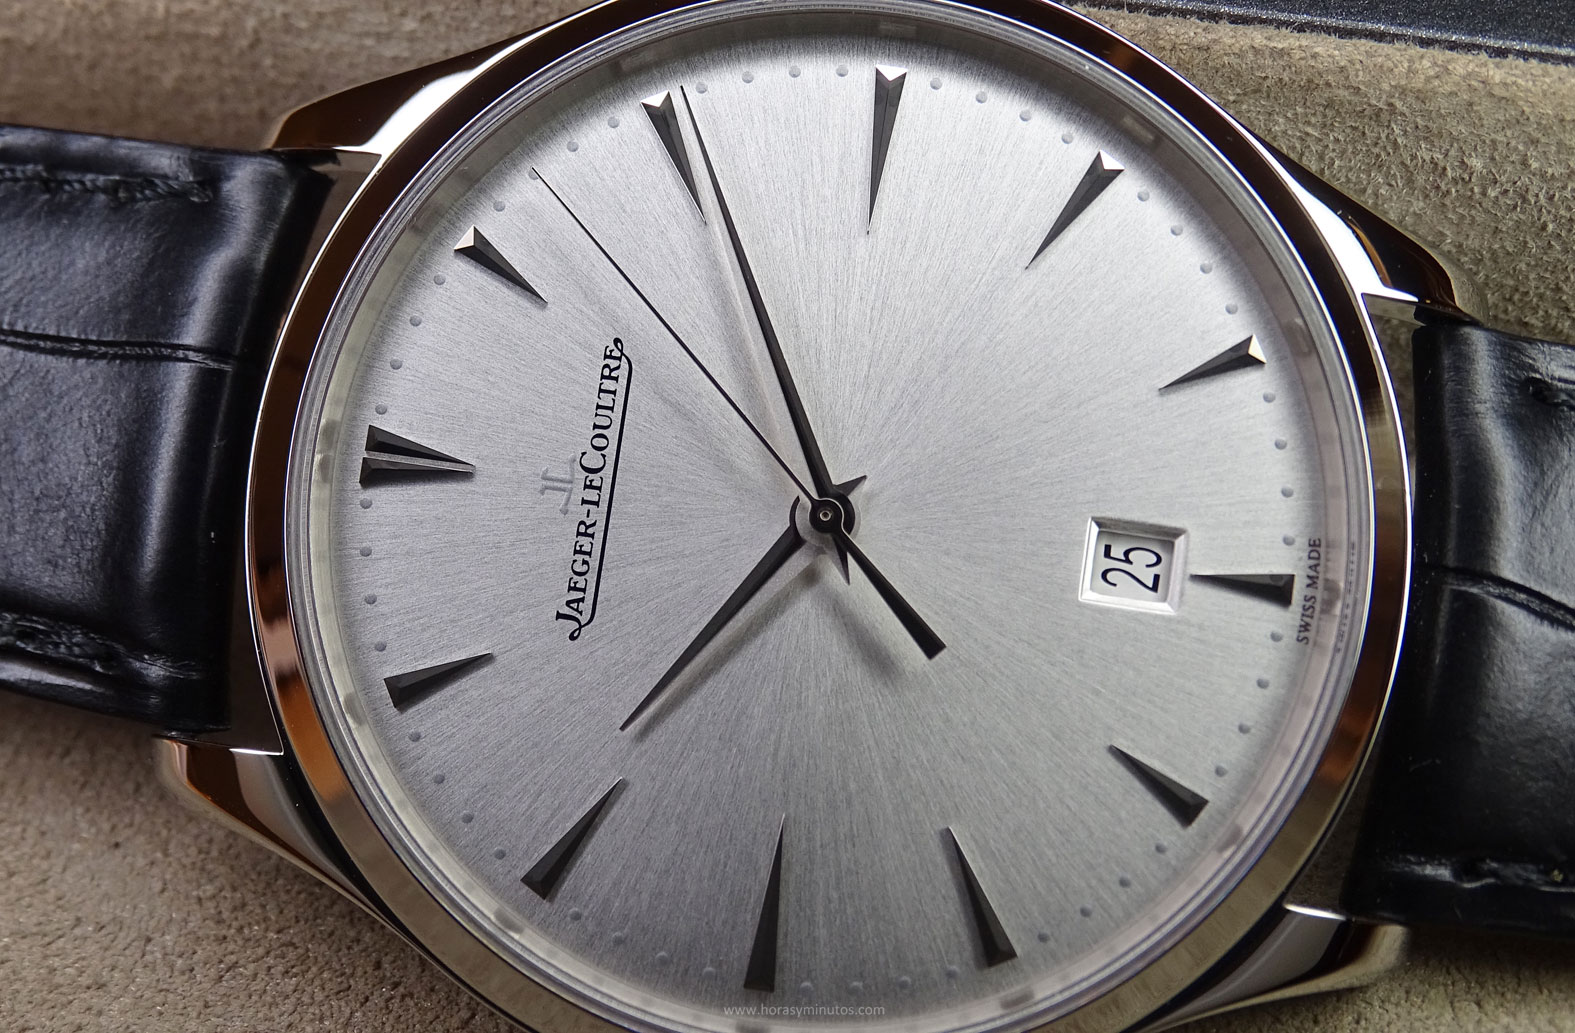 Jaeger-LeCoultre Master Ultra Thin Acero perfil